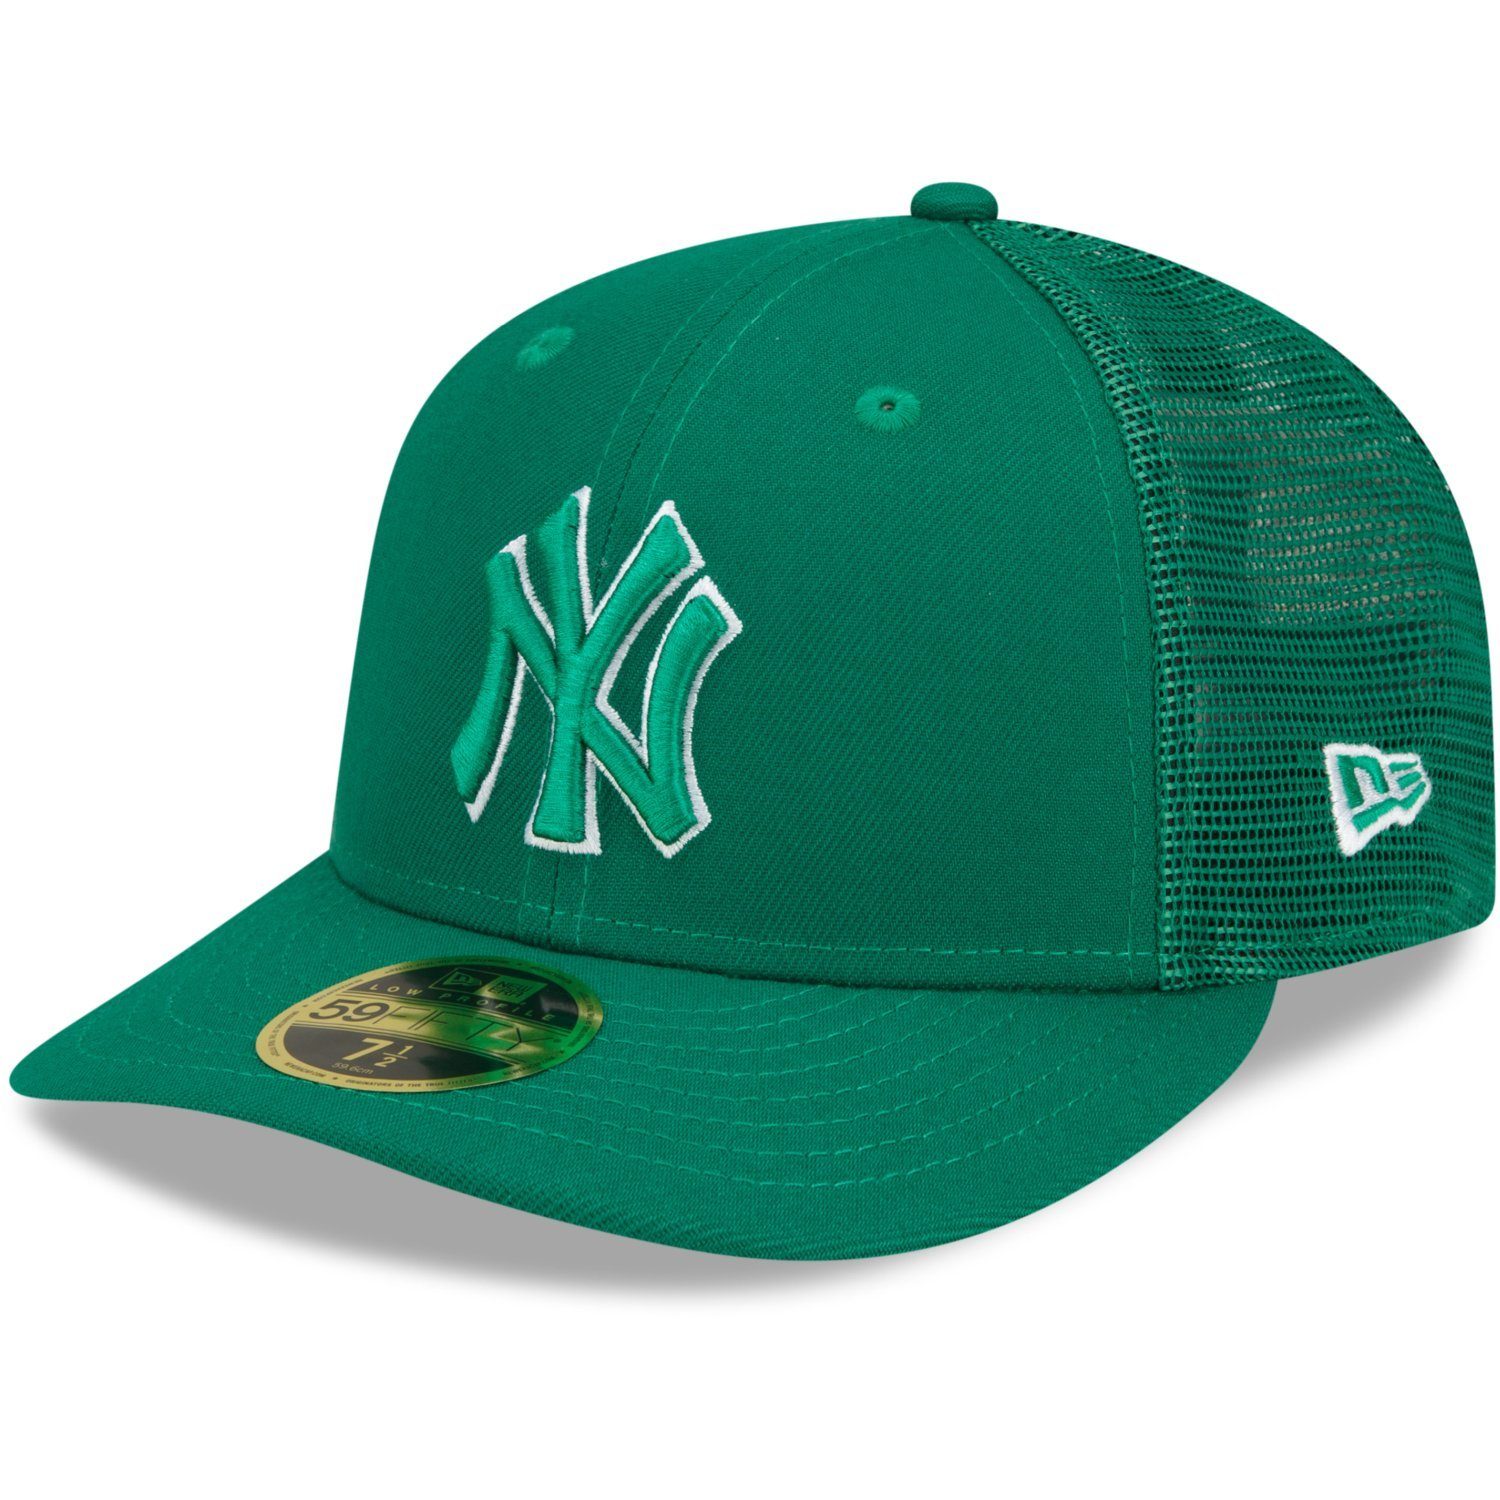 PATRICK’S York New Profile 59Fifty Low Cap DAY ST. Era New Fitted